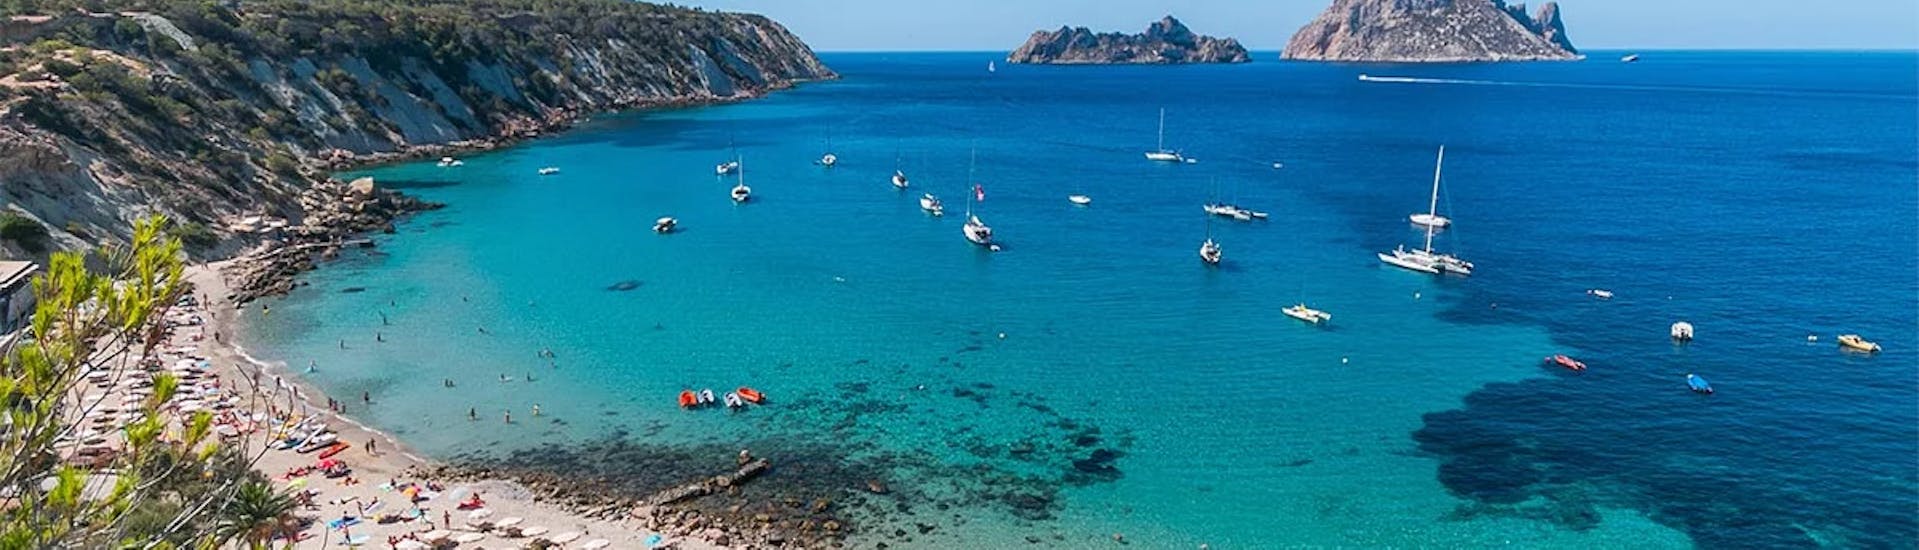 Private Boat Trip from Santa Eulalia to Ses Salines & Atlantis with Snorkeling.